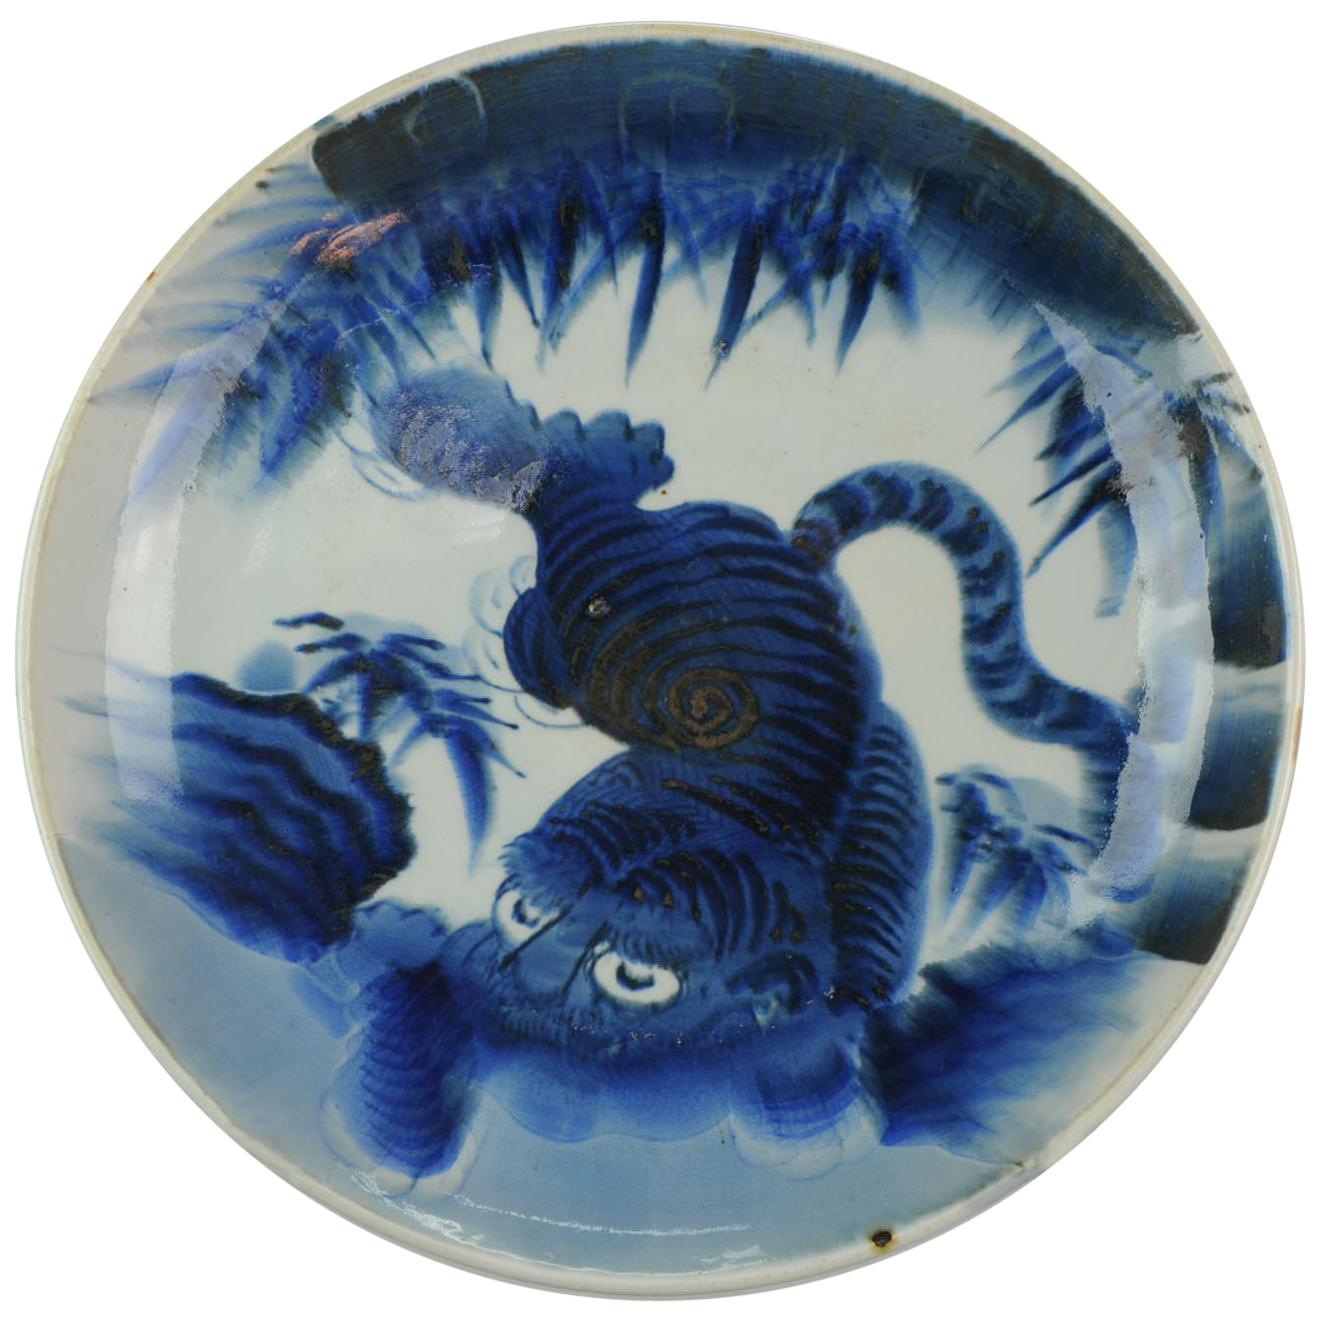 17th-18th Century Japanese Porcelain Charger Edo Period Bamboo Tiger